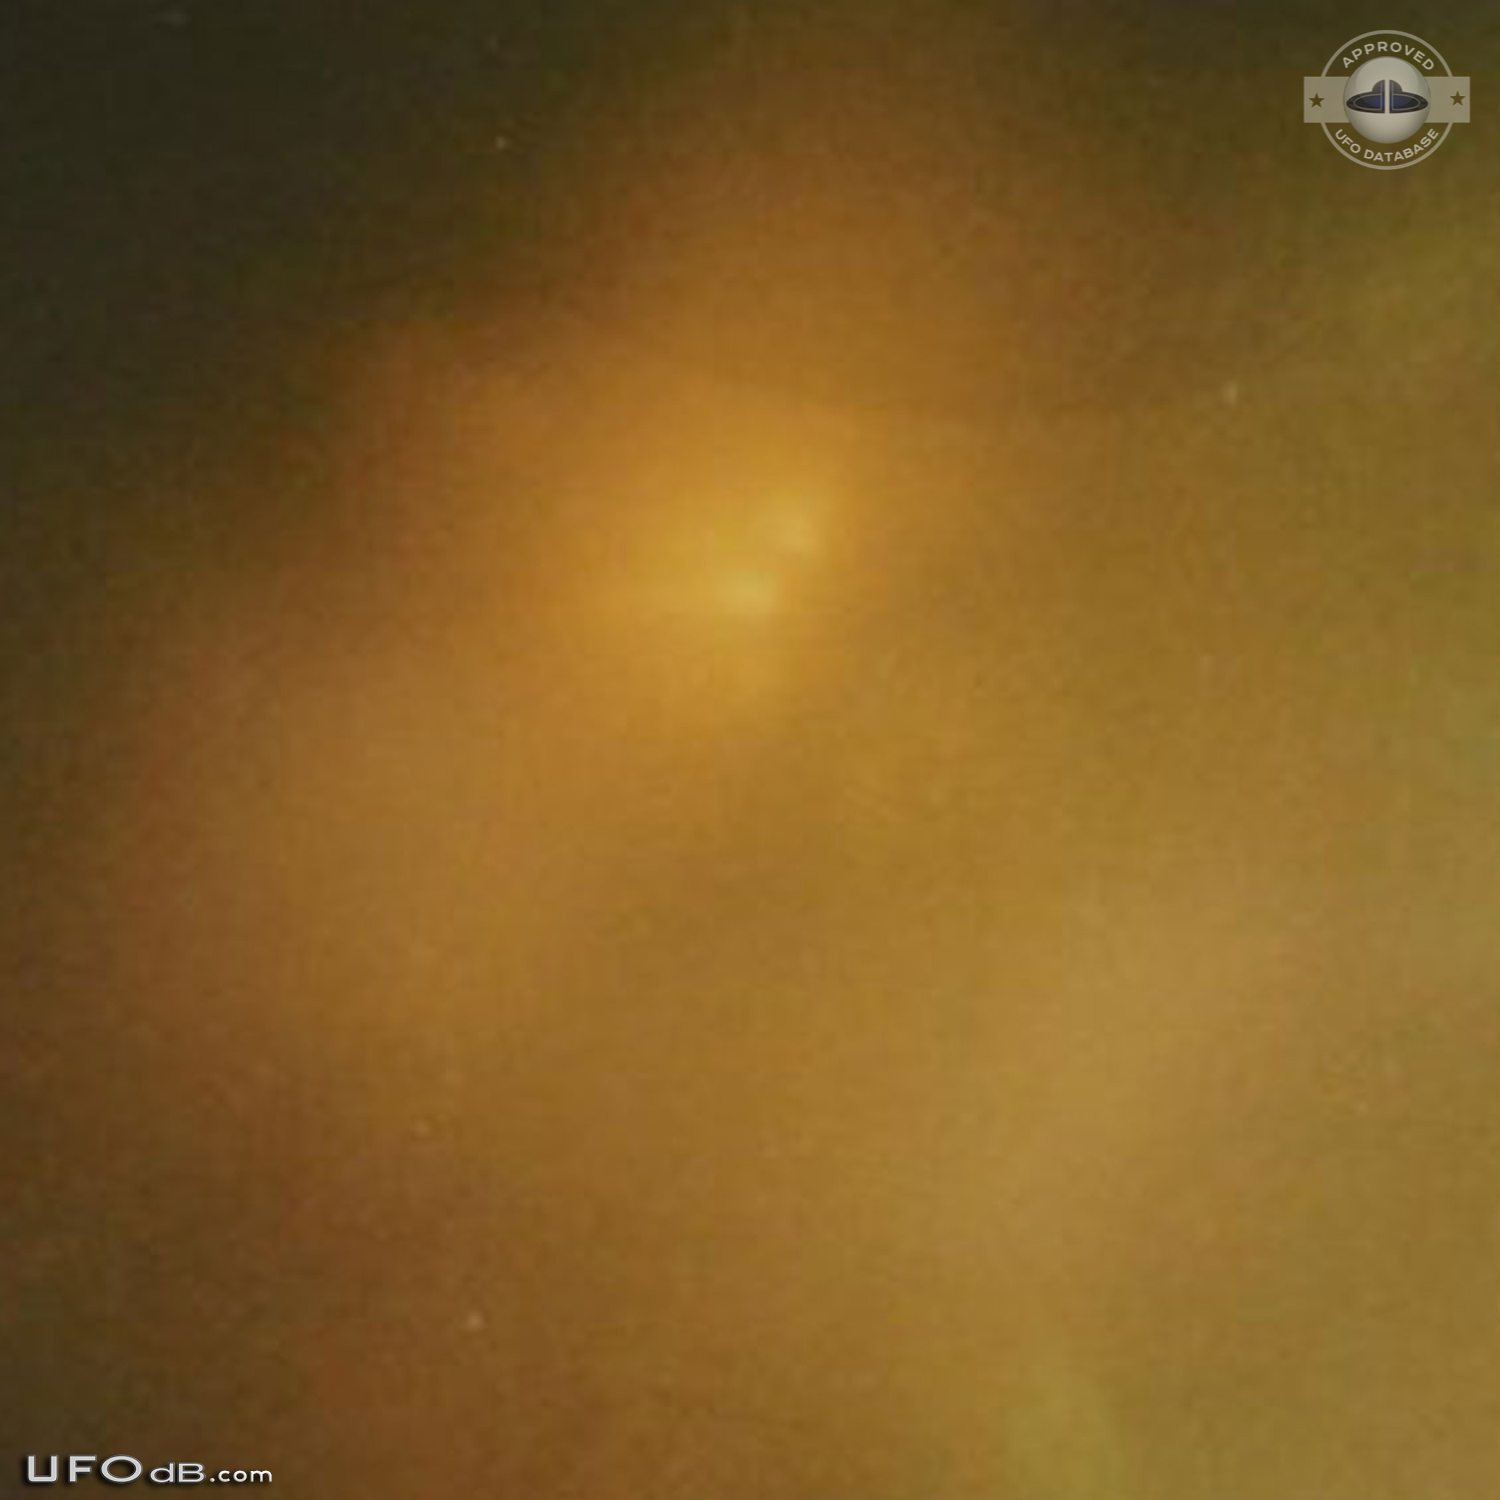 Famous Montreal Canada mass ufo sighting of November 7 1990 UFO Picture #546-3